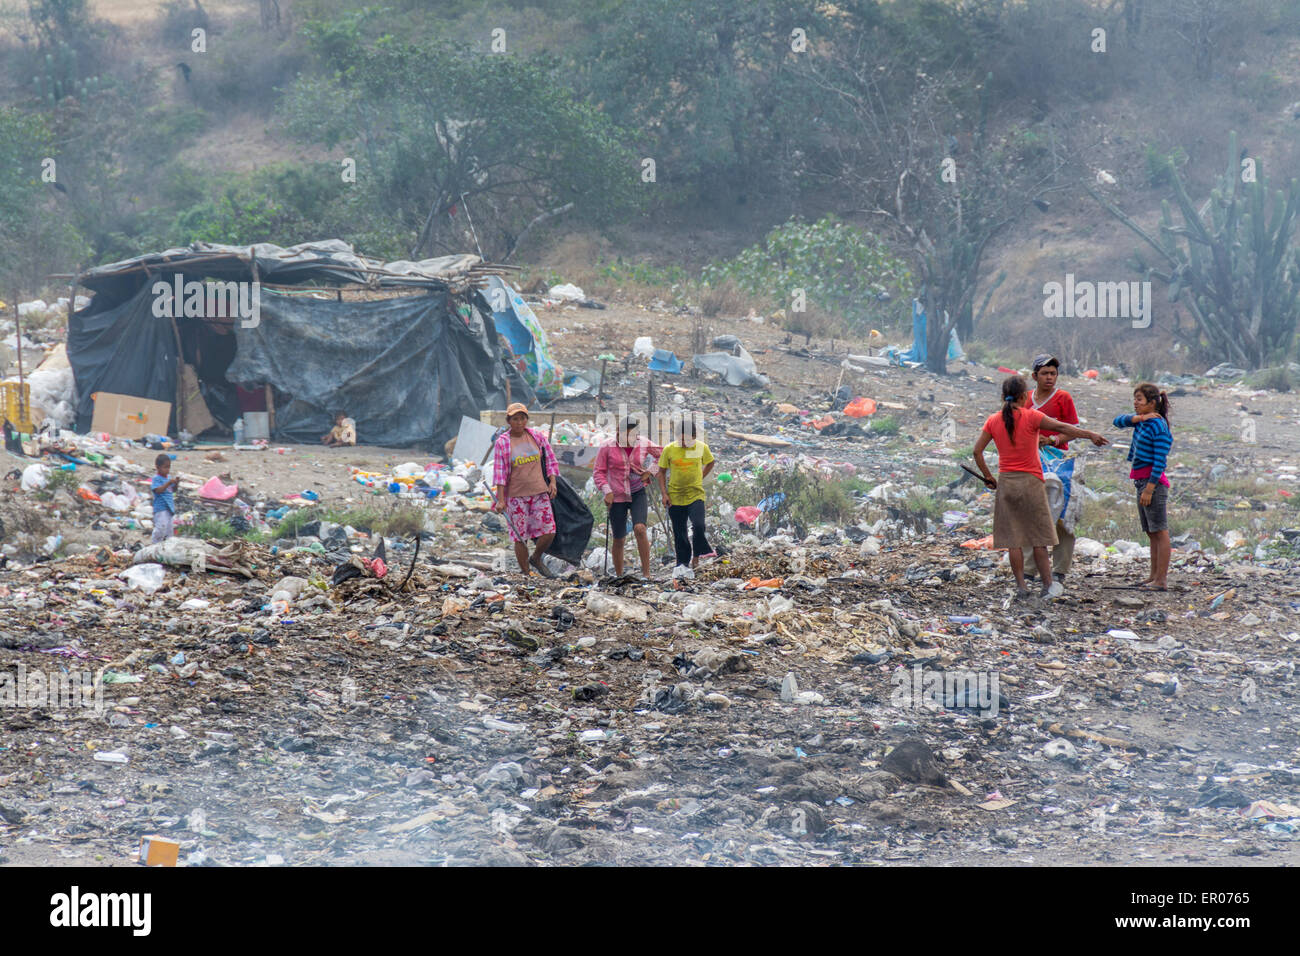 Storage huts for recyclable items being collected by poor people at a garbage dump in Guatemala Stock Photo